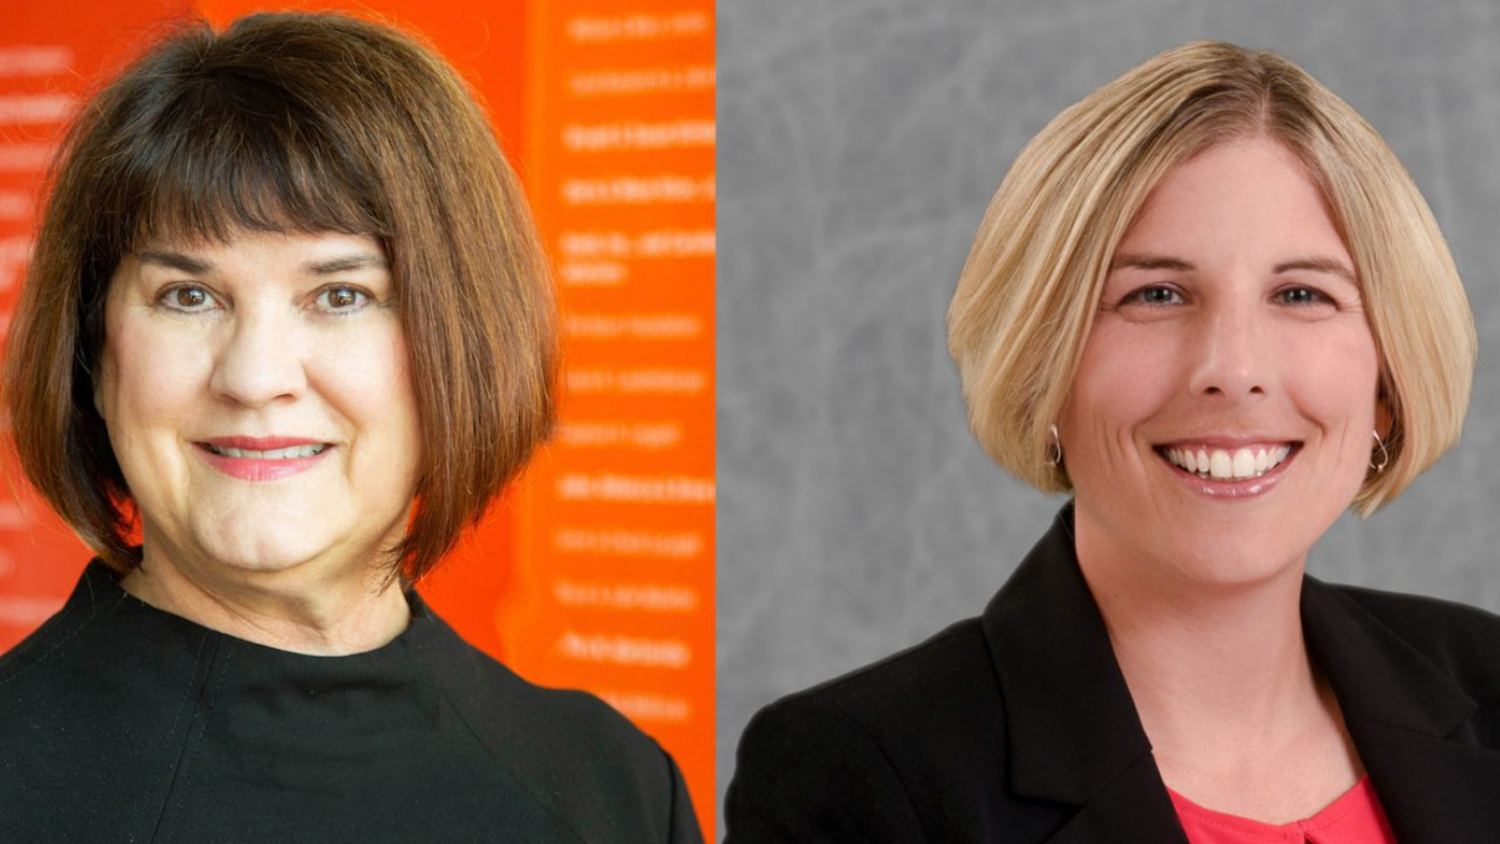 A side-by-side photo of Hiller Spires, Ph.D., and Erin Krupa, Ph.D.